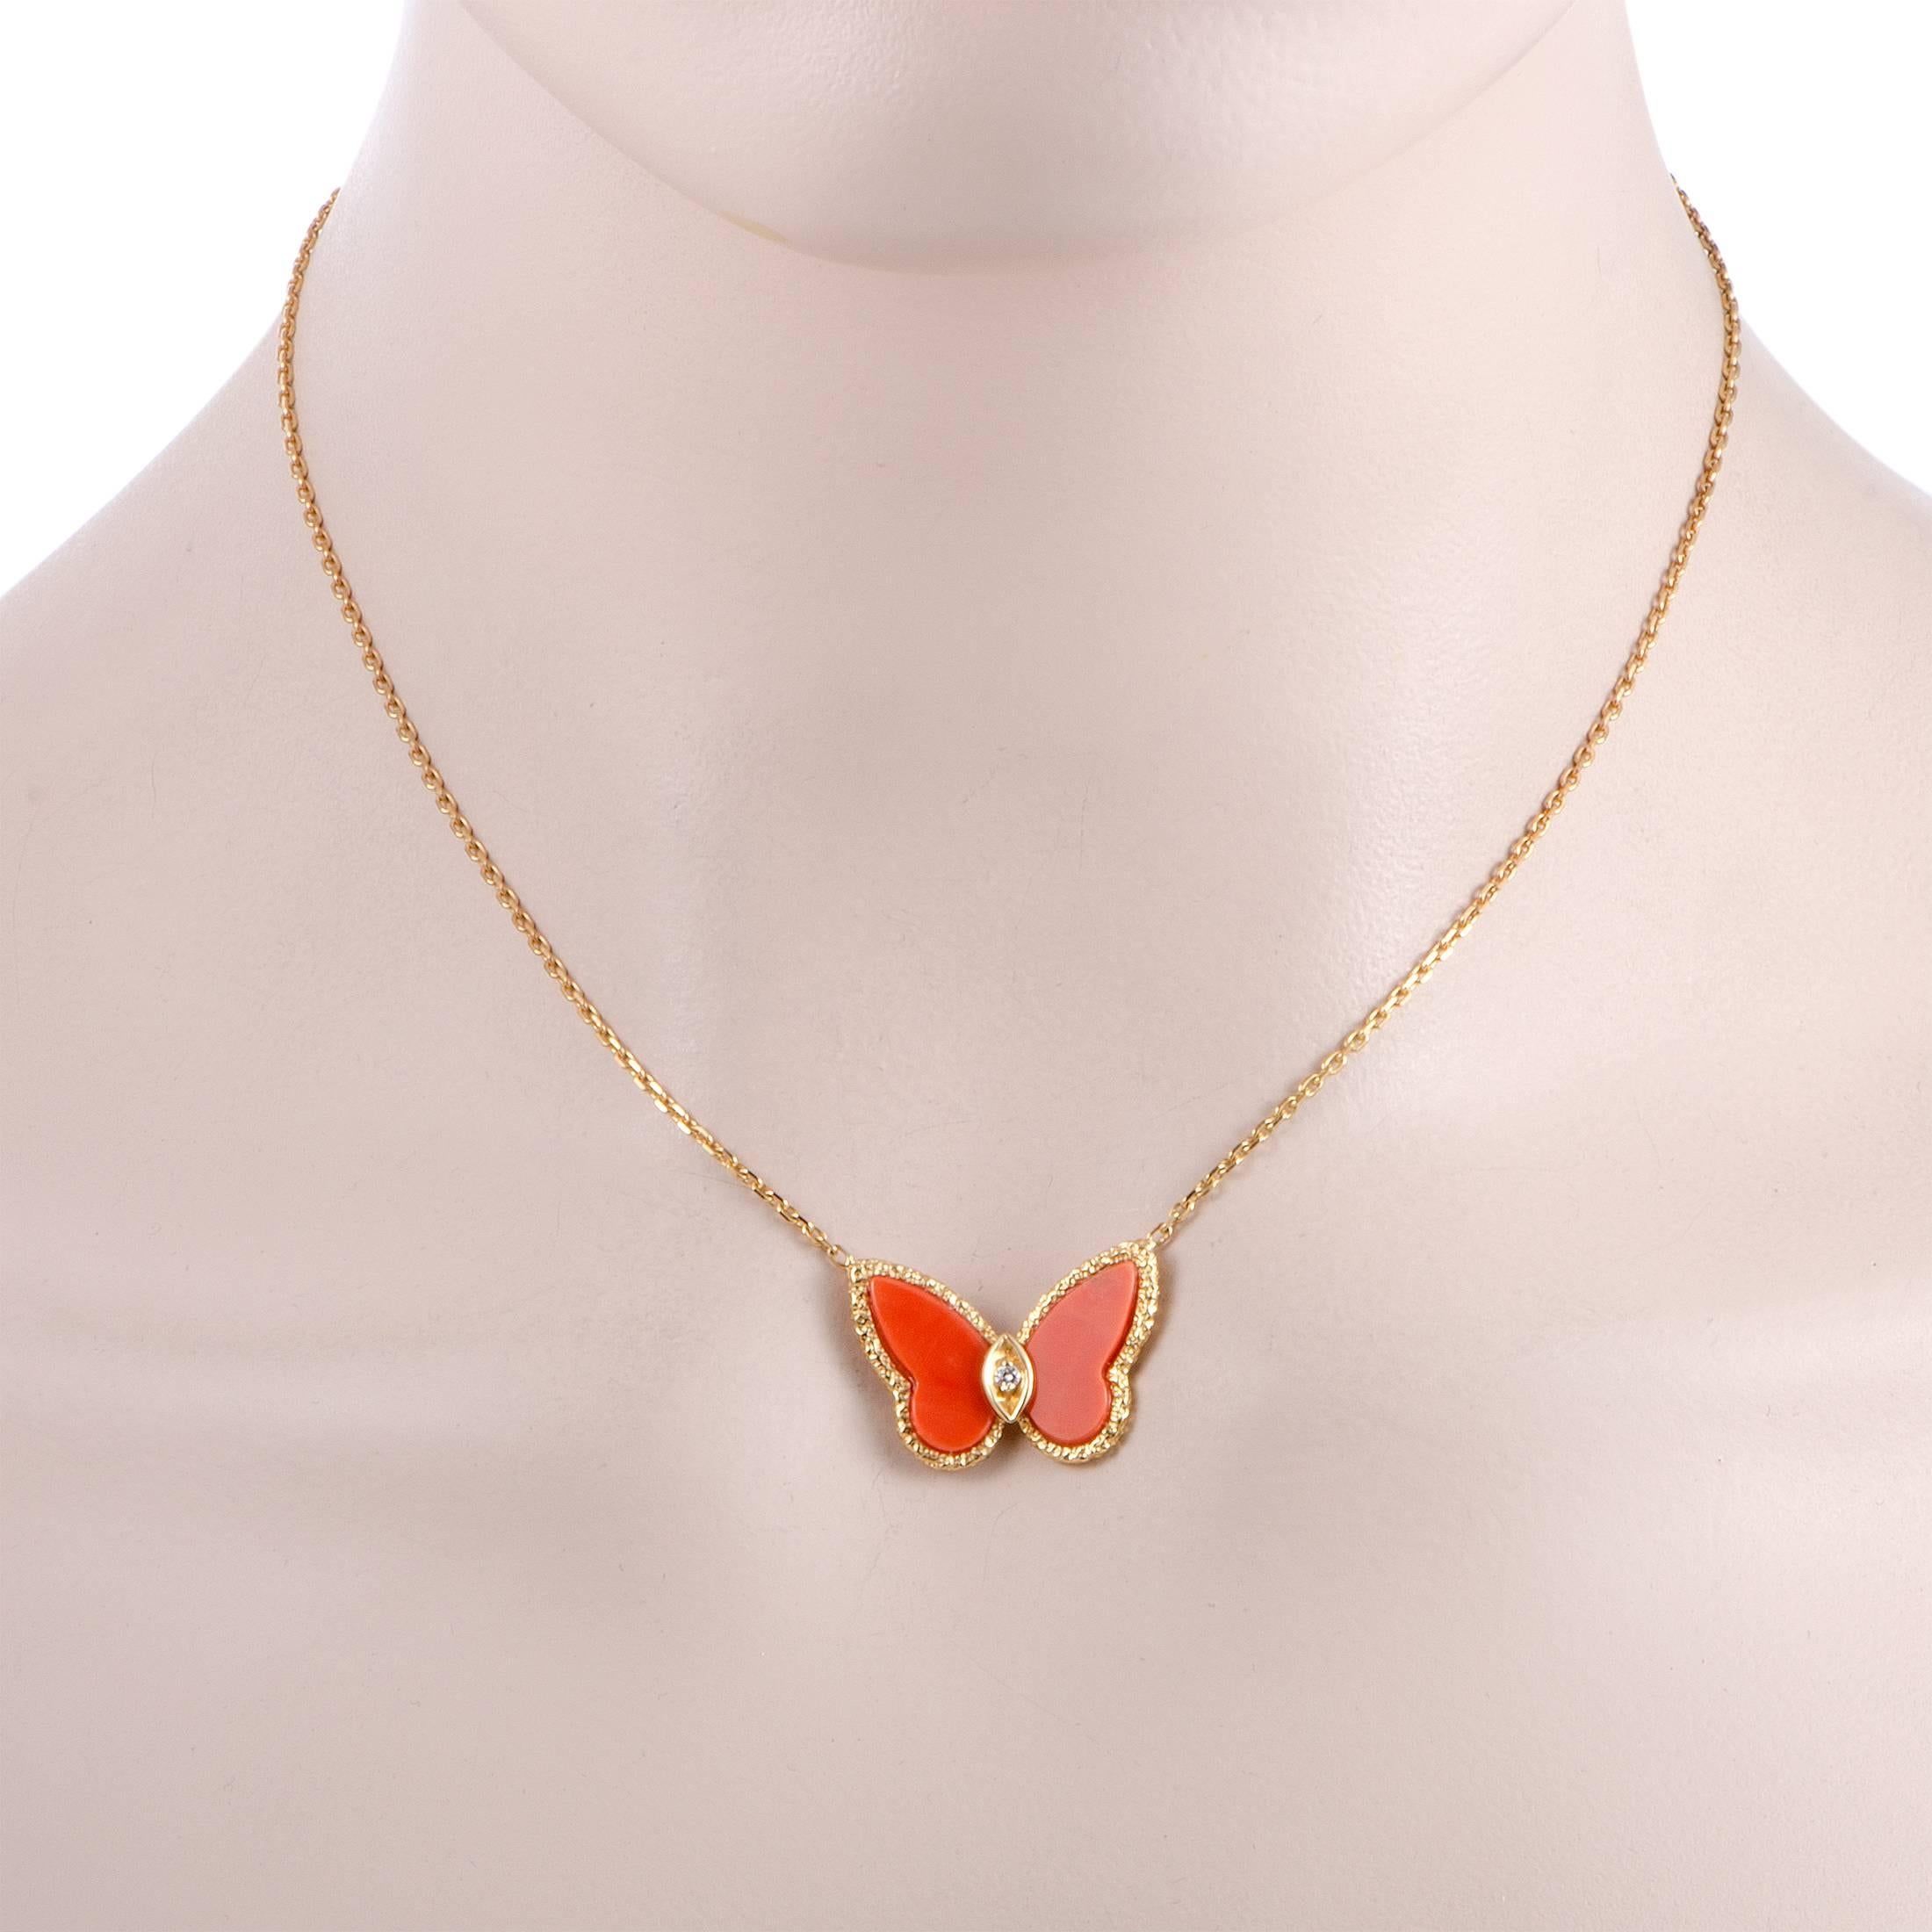 Incredibly eye-catching and feminine, this splendid vintage necklace designed by Van Cleef & Arpels boasts a delightfully elegant appeal. The necklace is made of radiant 18K yellow gold and features a dainty butterfly pendant set with corals and a